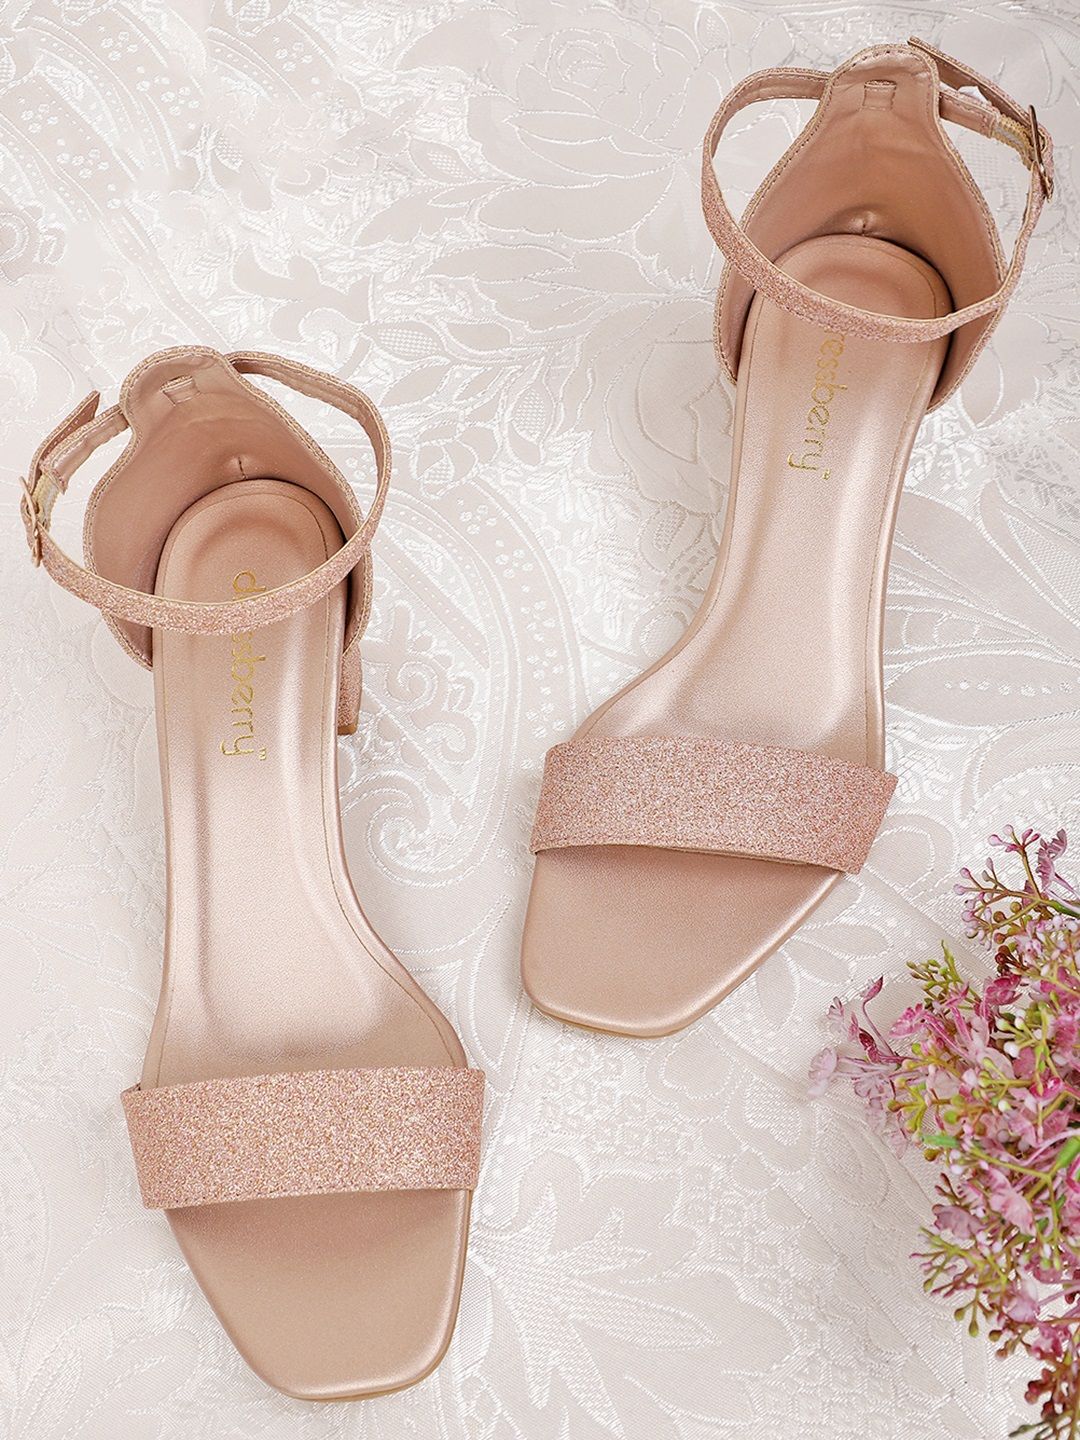 DressBerry Nude-Coloured Party Block Sandals Price in India